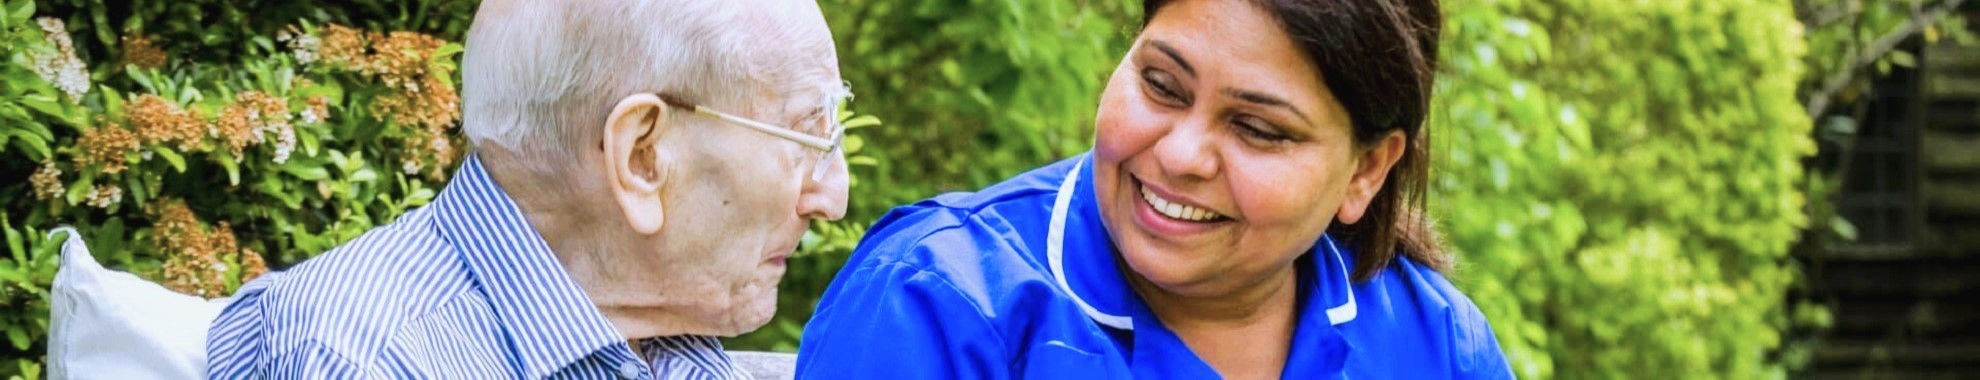 A Nurse smiling and talking with a patient